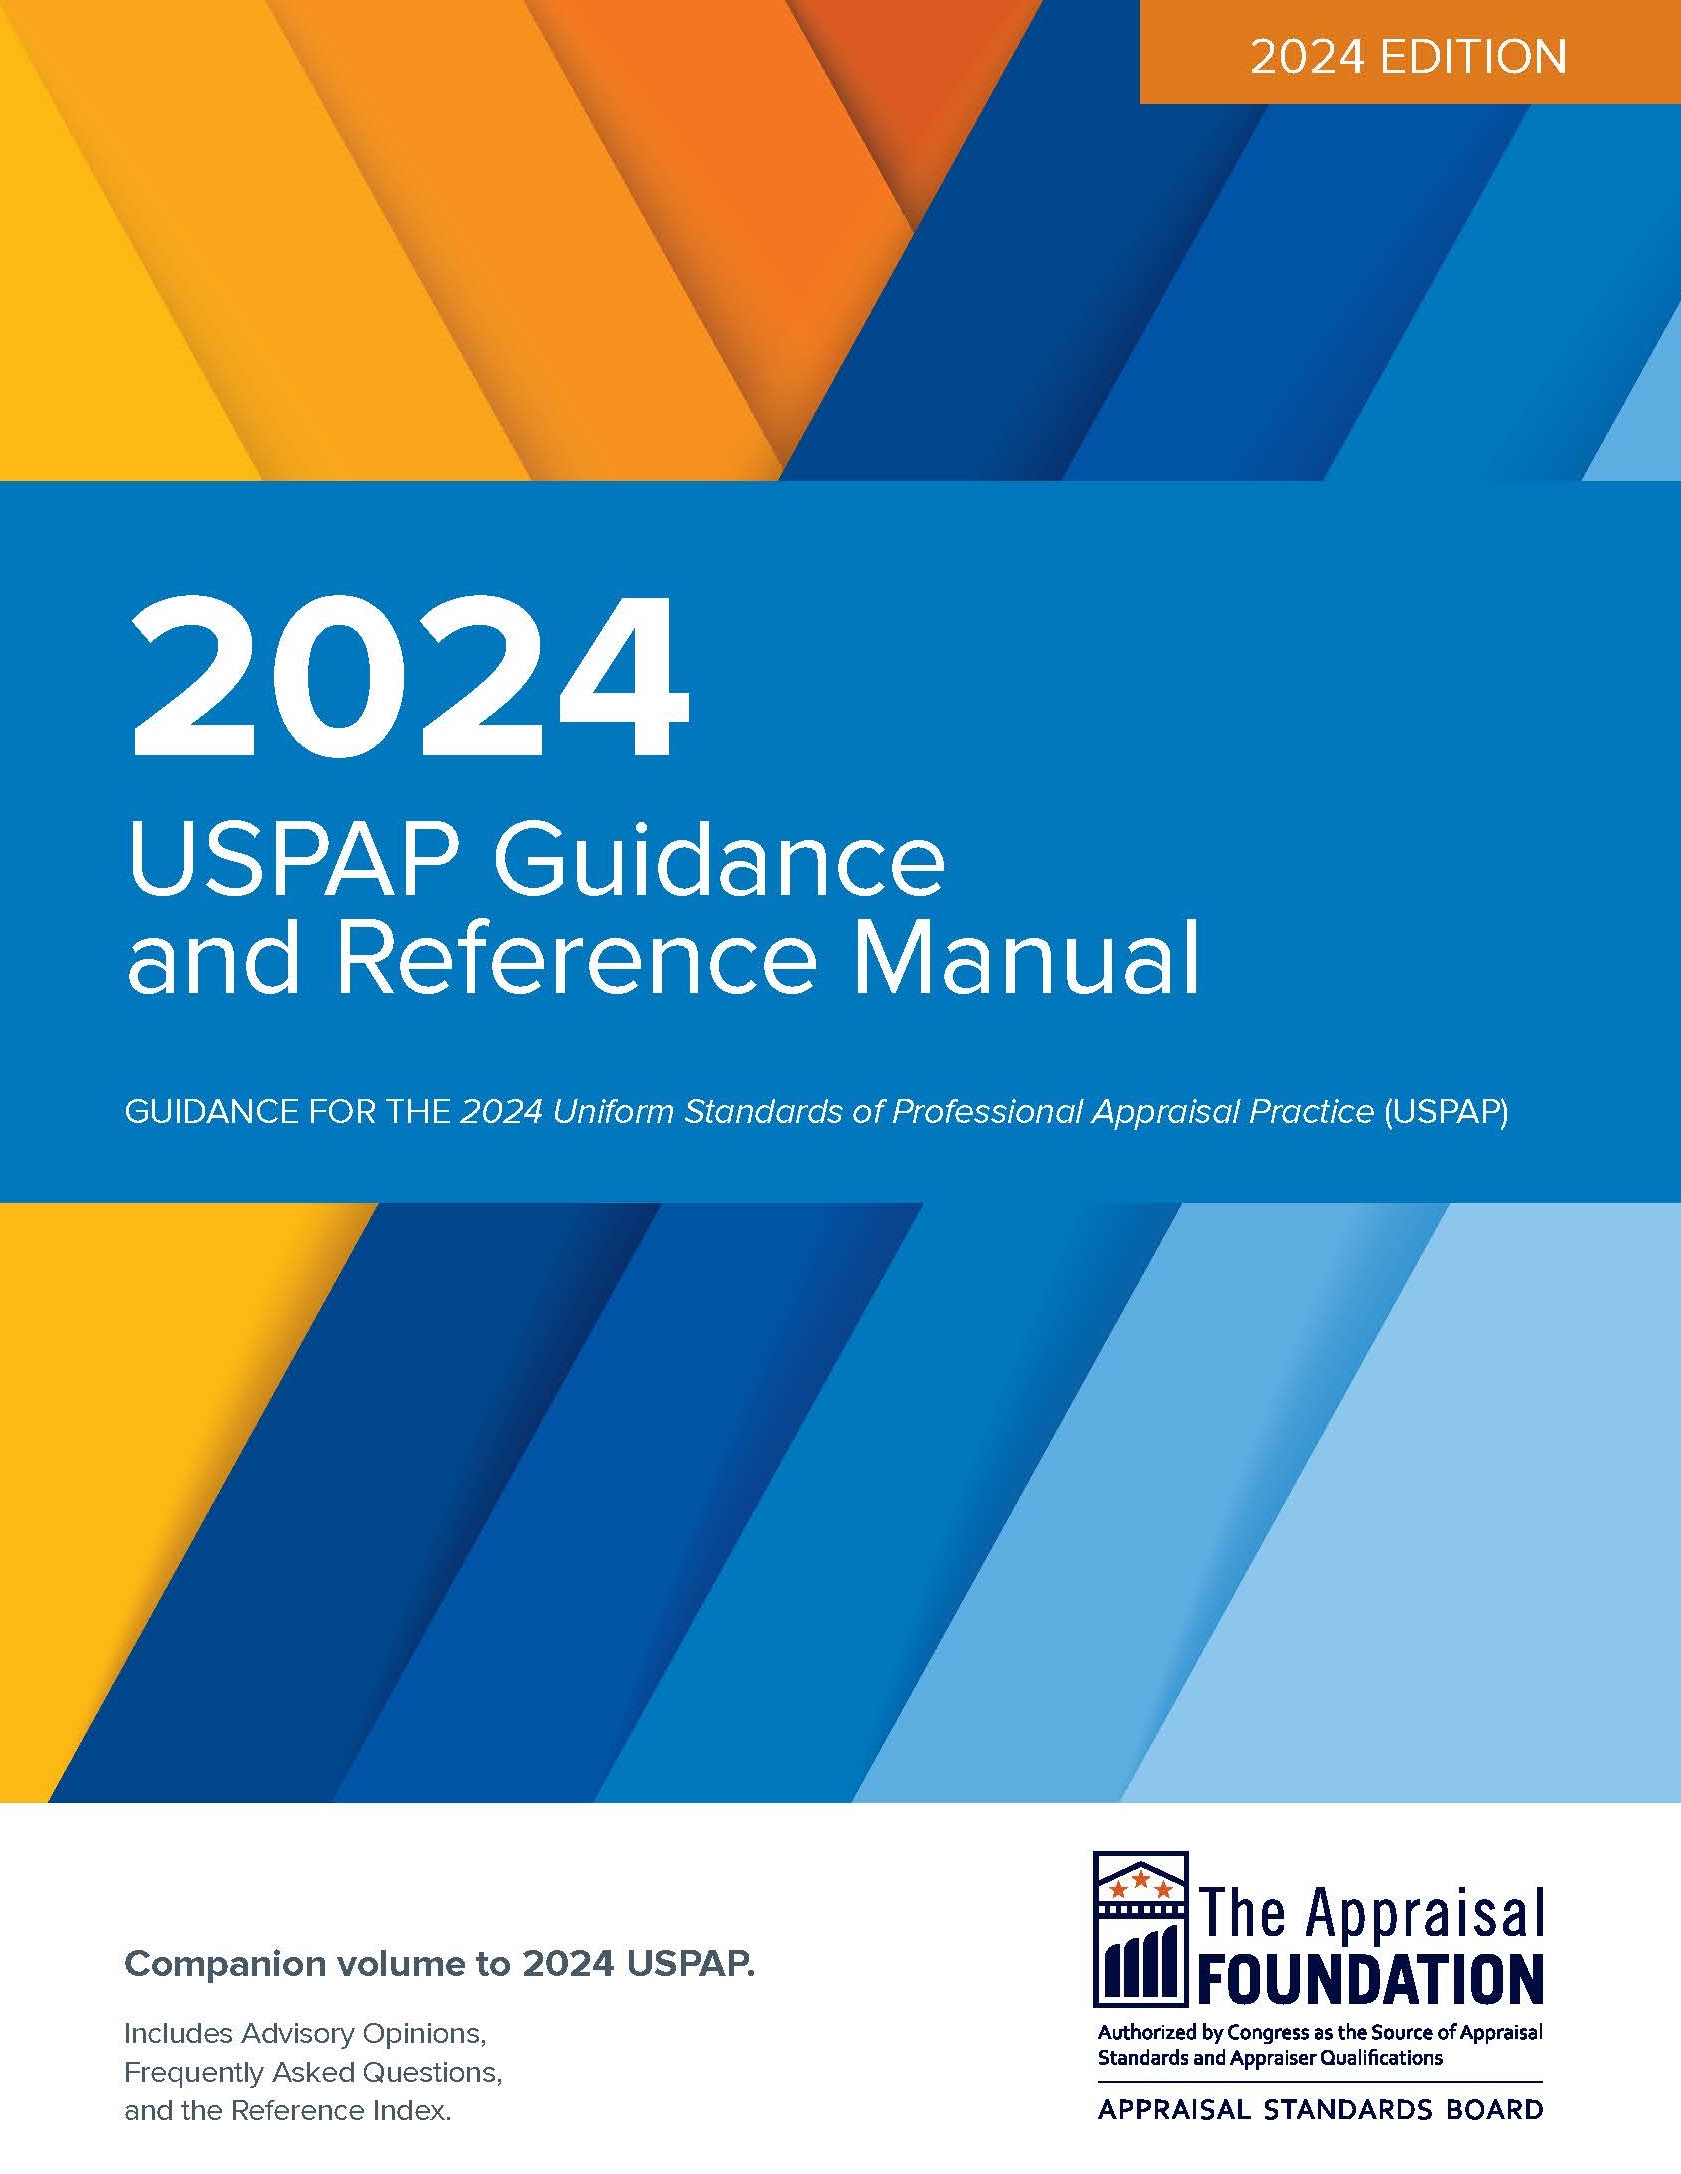 NEW 2024 USPAP Guidance and Reference Manual (PRINT)